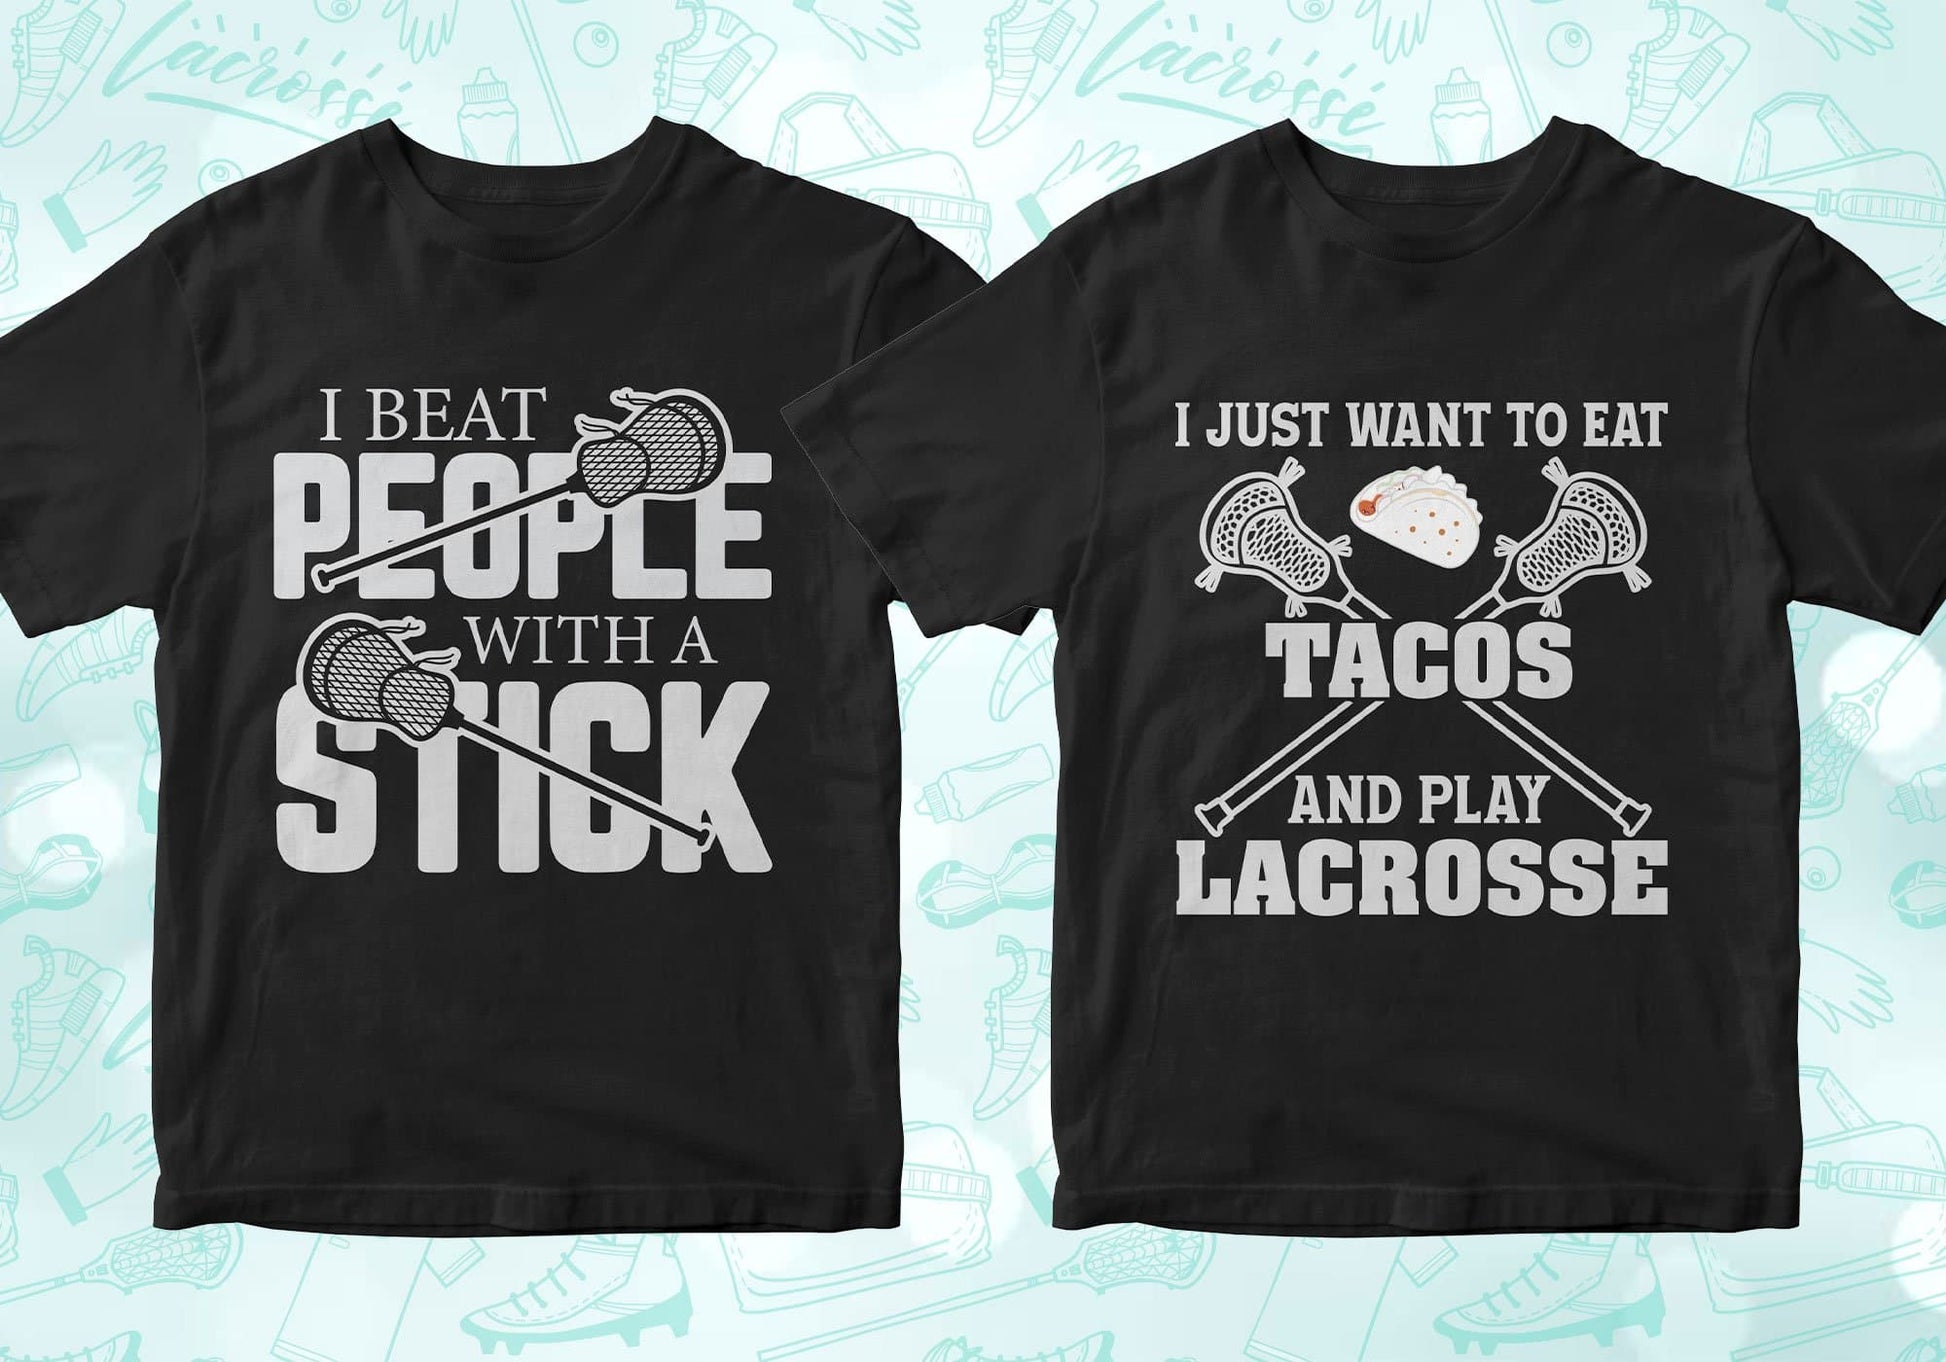 i beat people with a stick, i just want to eat tacos and play lacrosse, lacrosse shirts lacrosse tshirt lacrosse t shirts lacrosse shirt designs lacrosse graphic